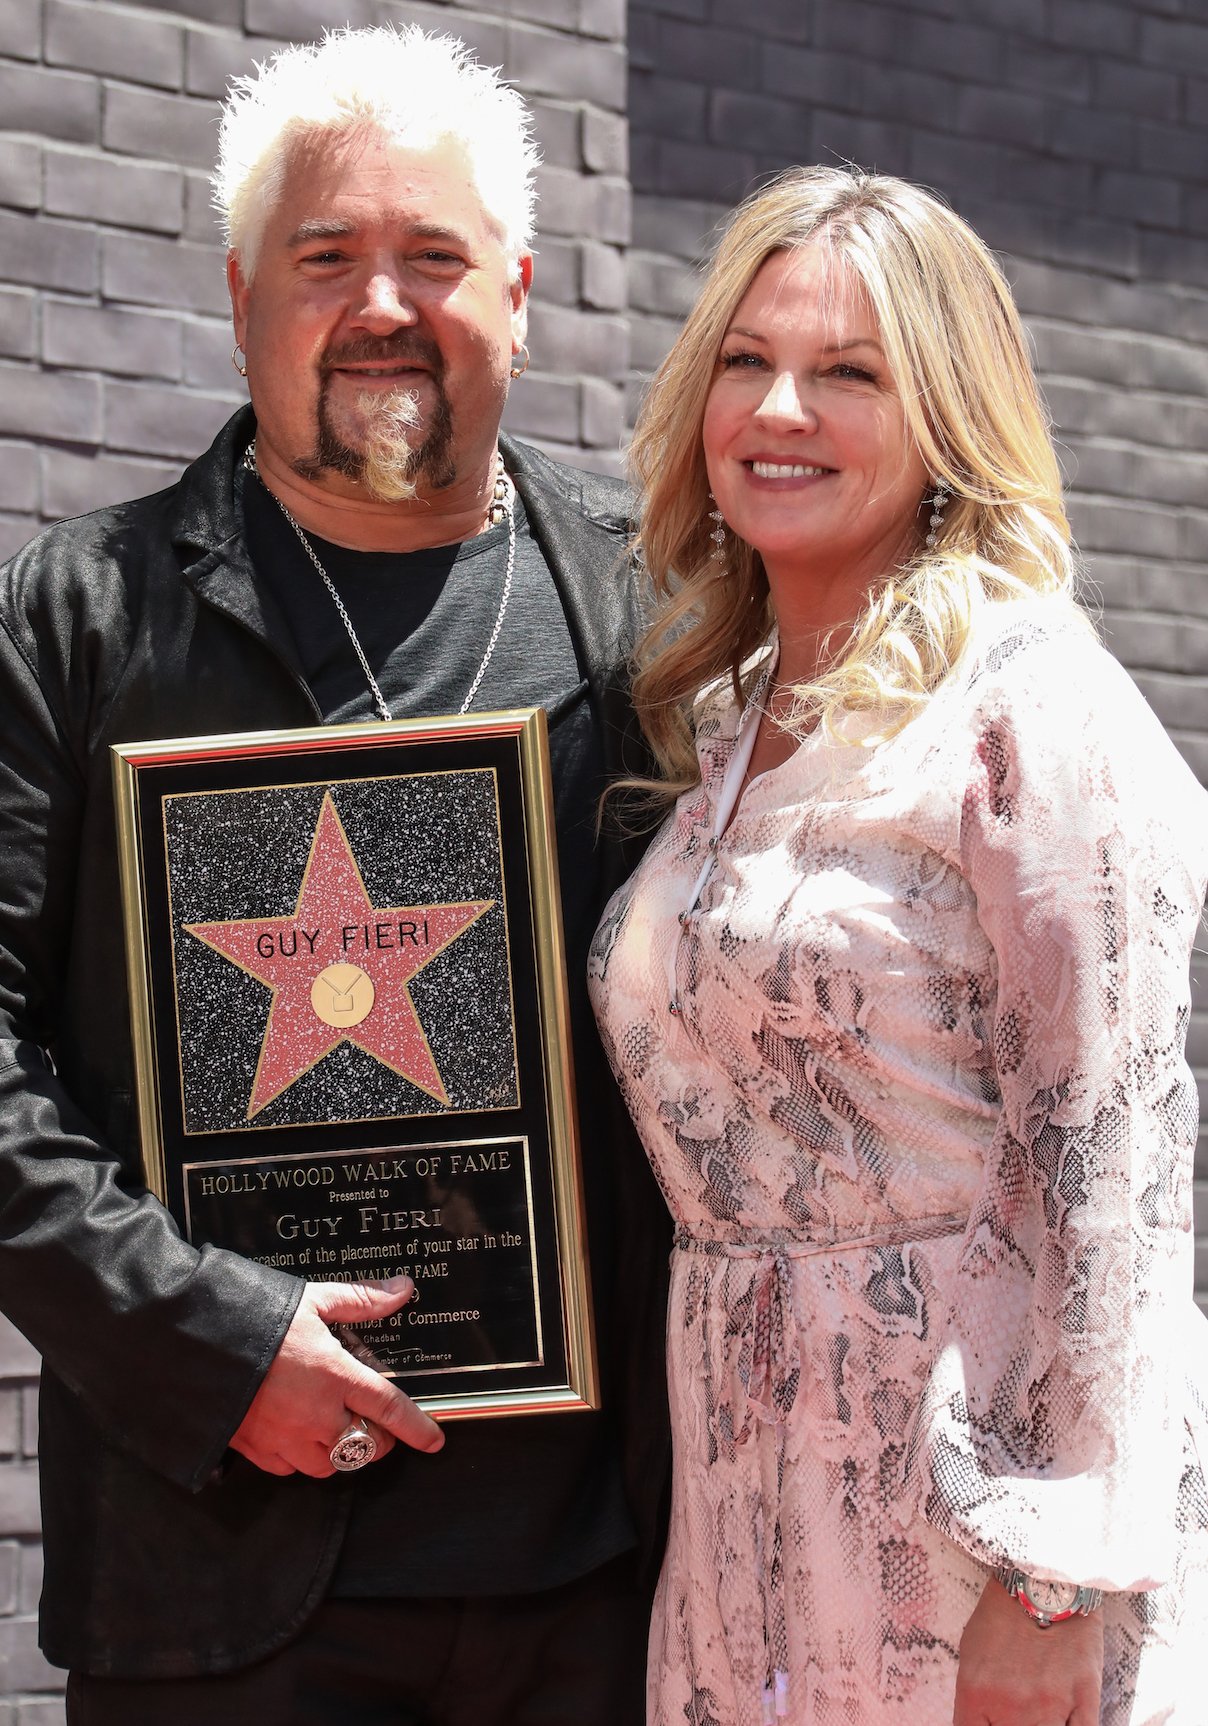 Guy Fieri With His Wife Lori Fieri At His Hollywood Walk Of Fame Ceremony 